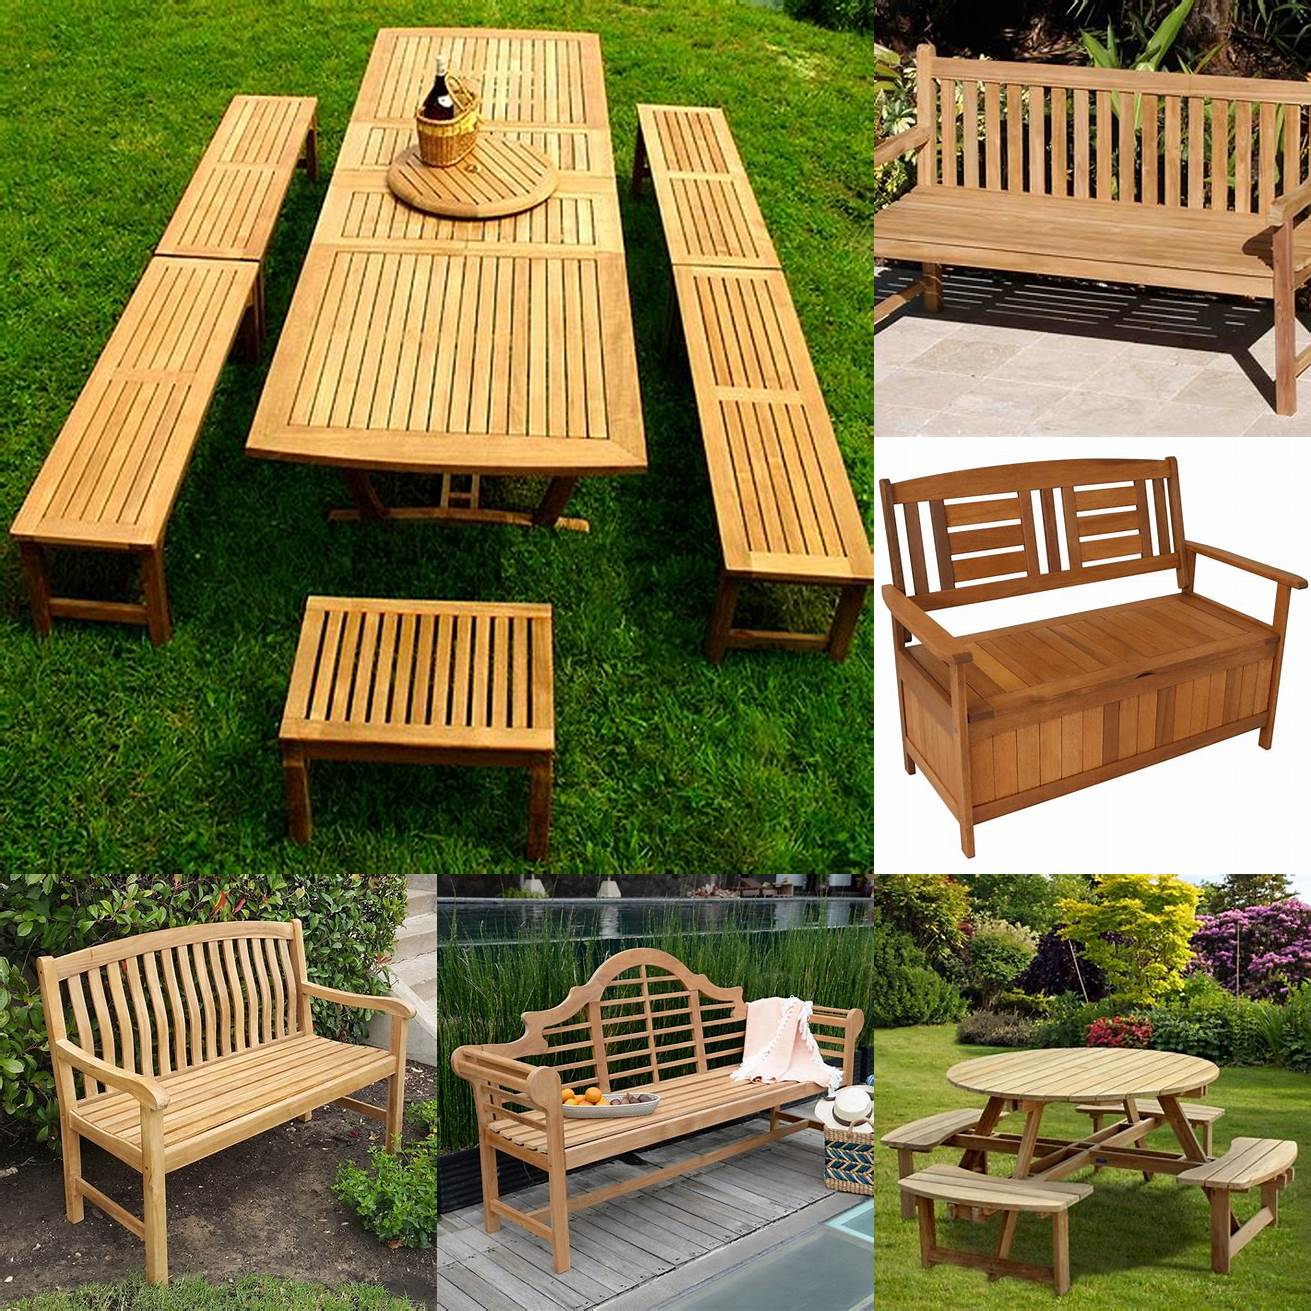 Teak Picnic Table and Benches With Storage